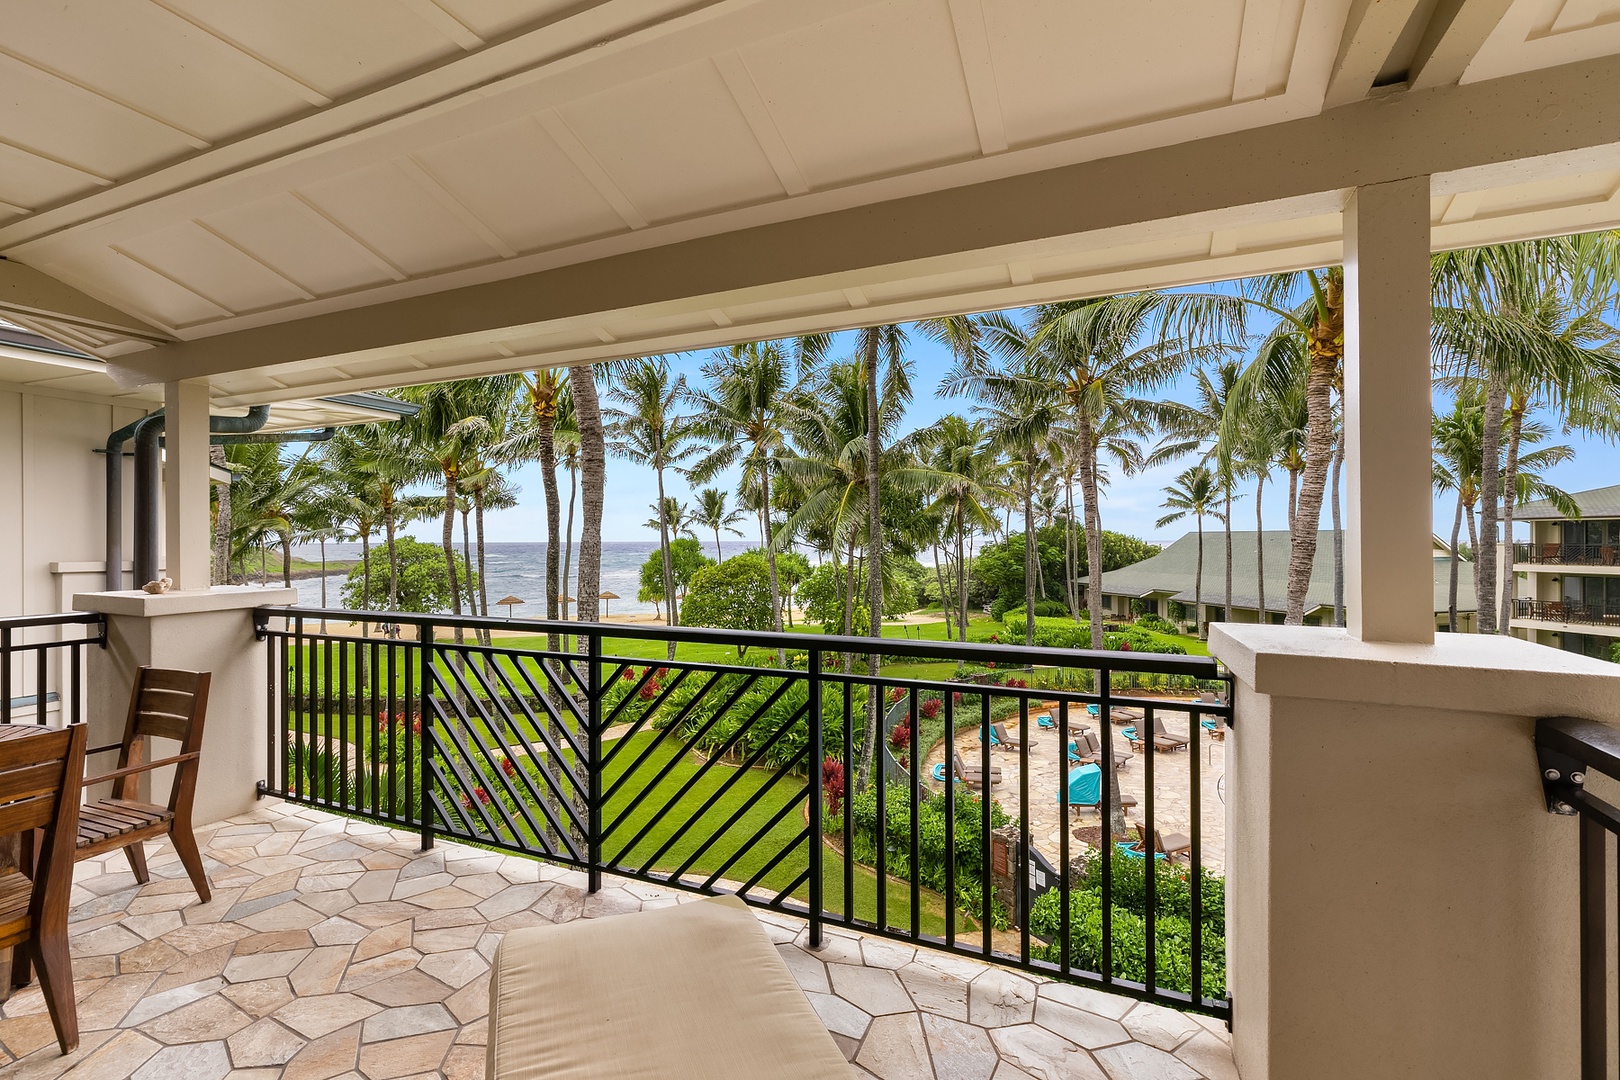 Kahuku Vacation Rentals, Turtle Bay Villas 307 - Enjoy the Ocean and Pool views from your private lanai